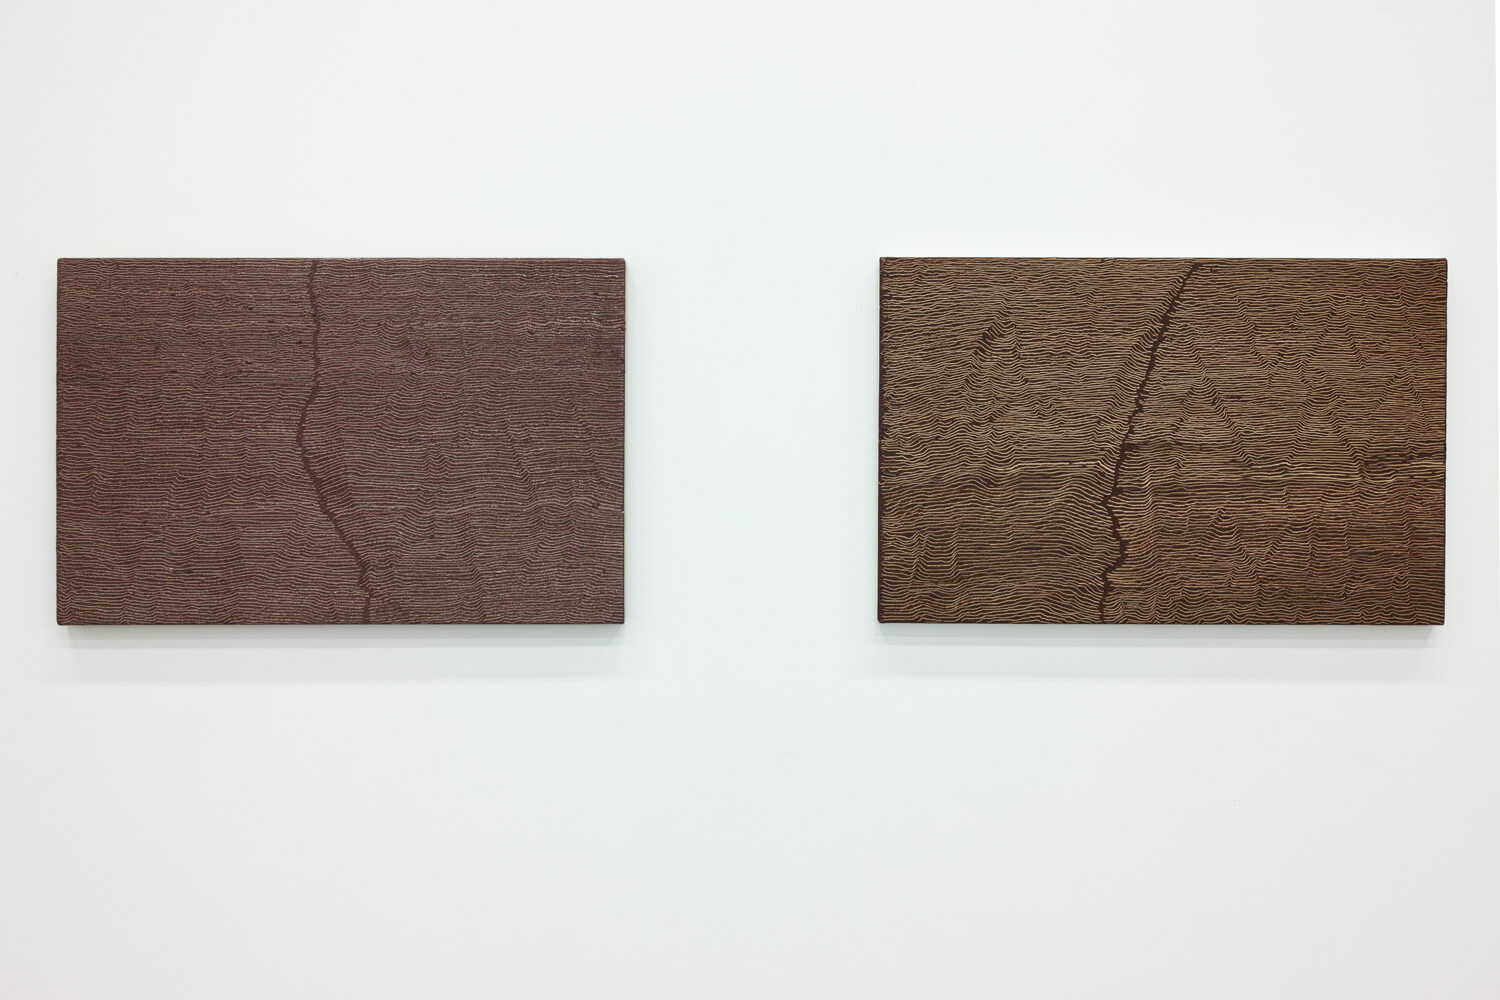 'Fissure 10'  (left) & 'Fissure 9' (right)<br>Oil and Amber on canvas over panel, 33.7 x 53.4 cm, 2001 each